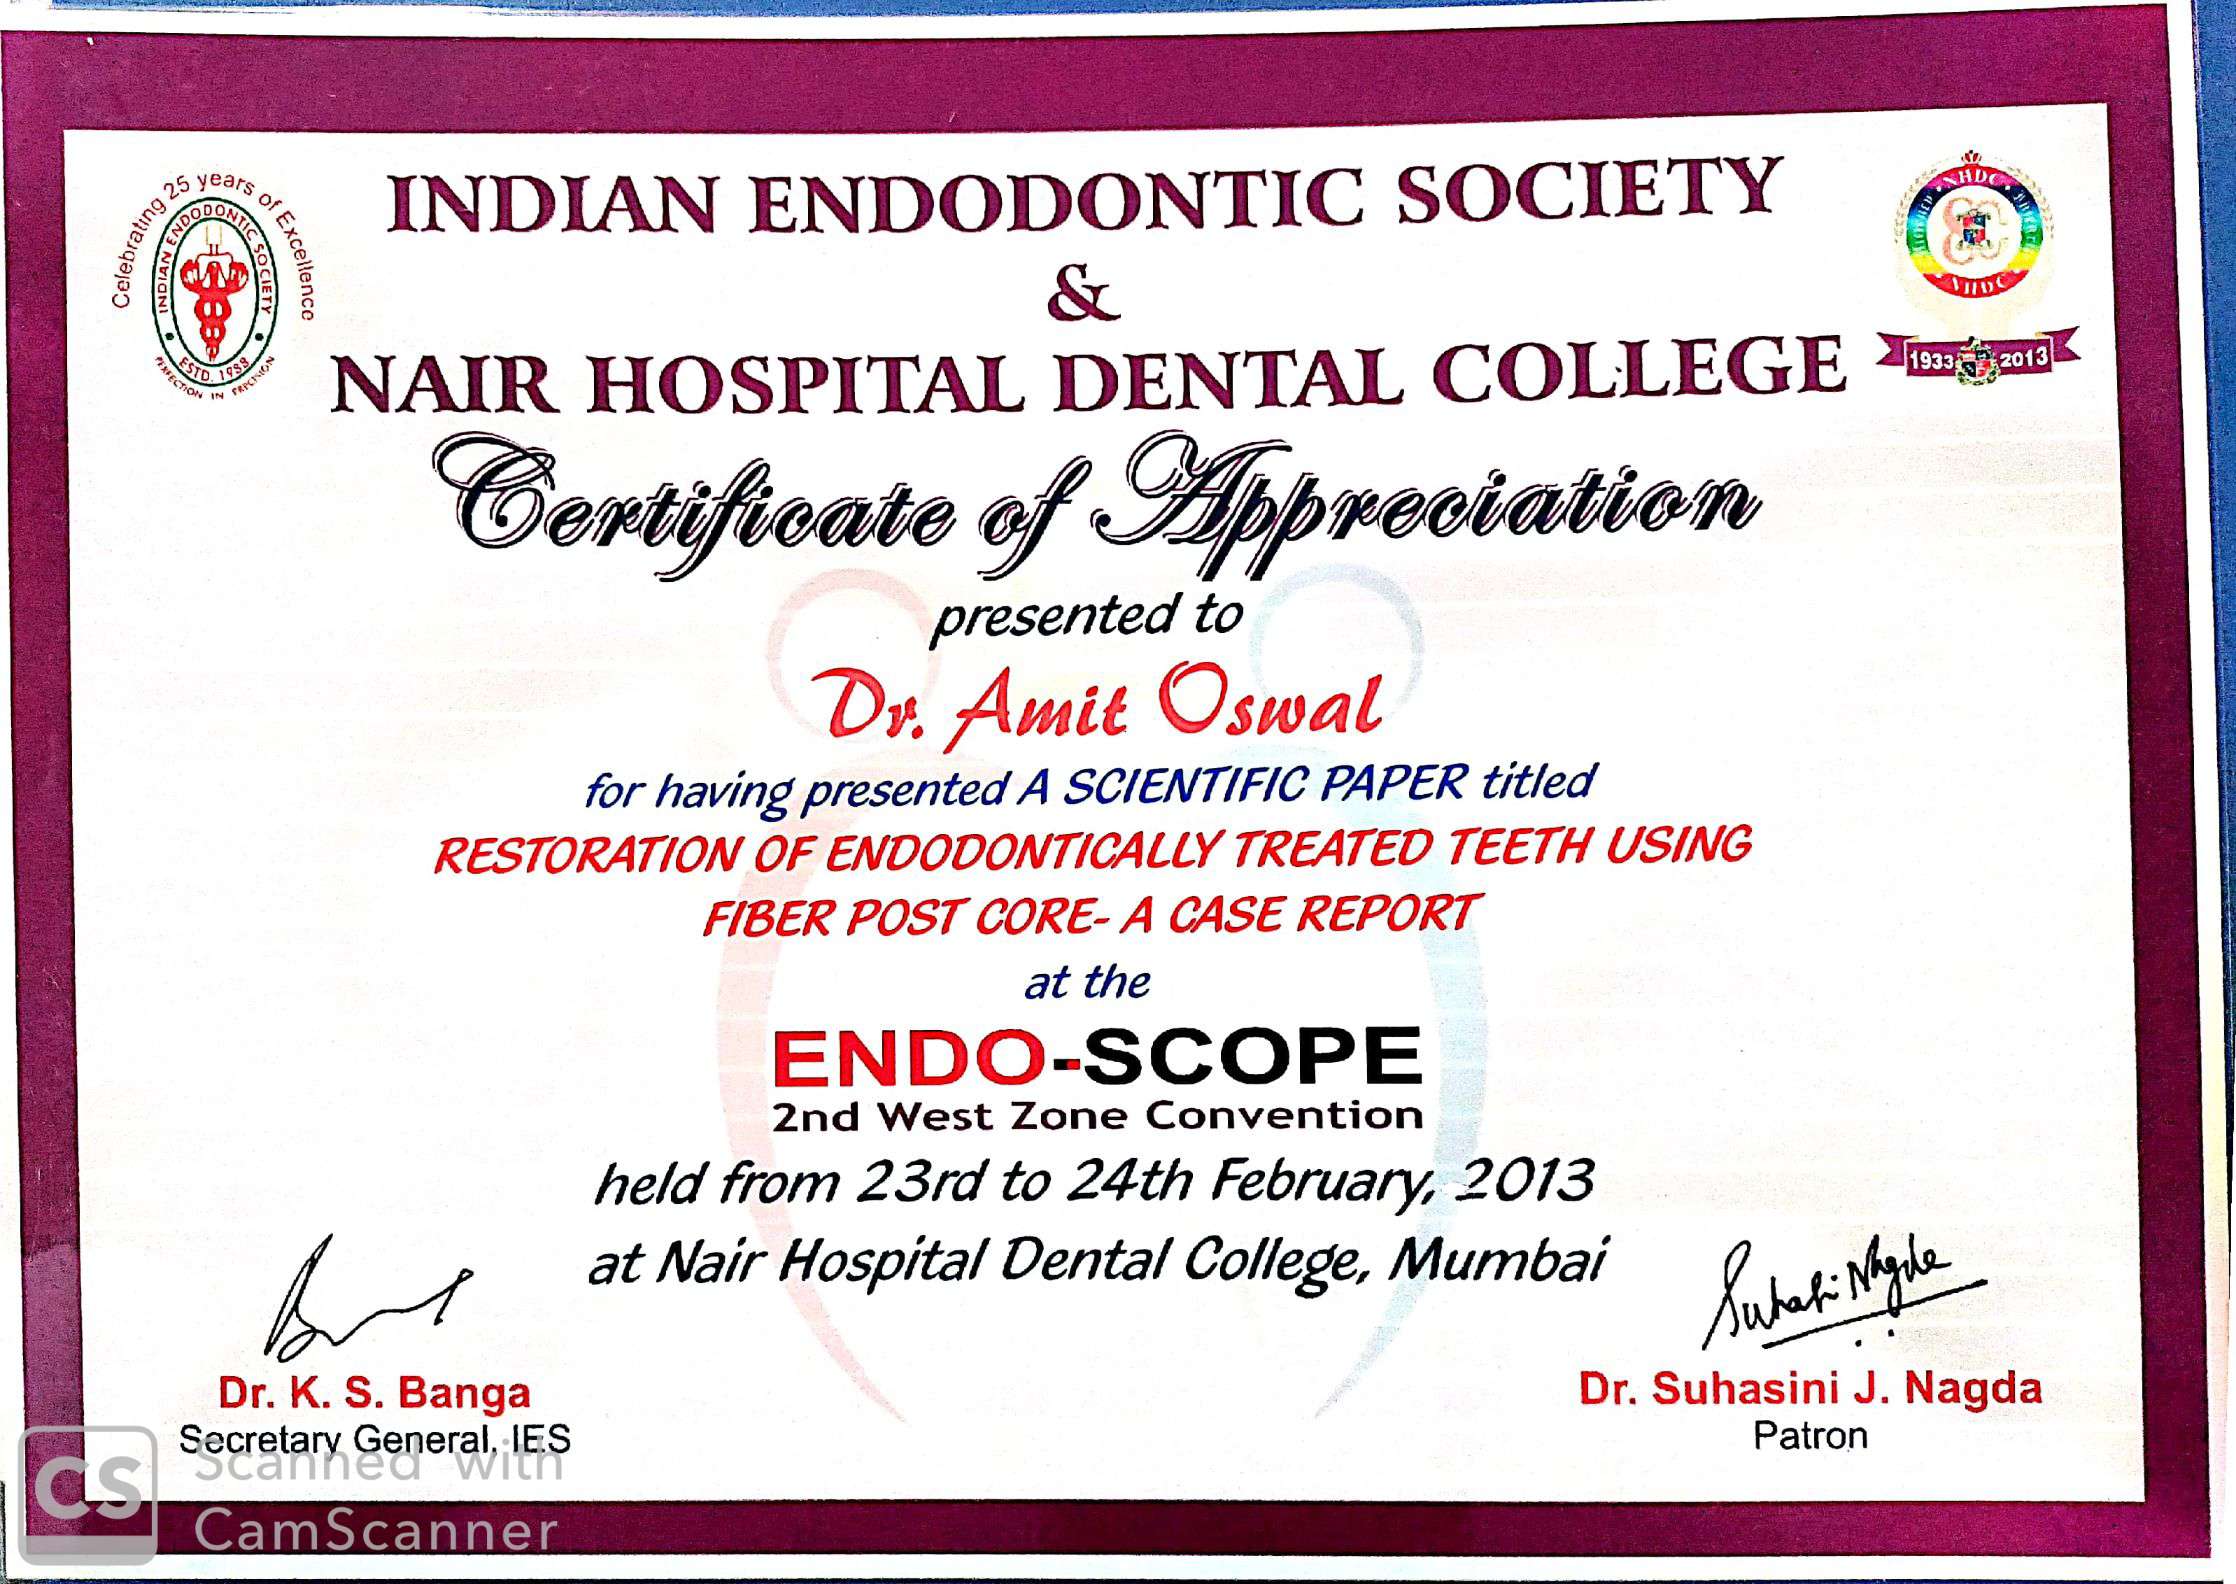 Participation at the Indian endodontic society by Odental